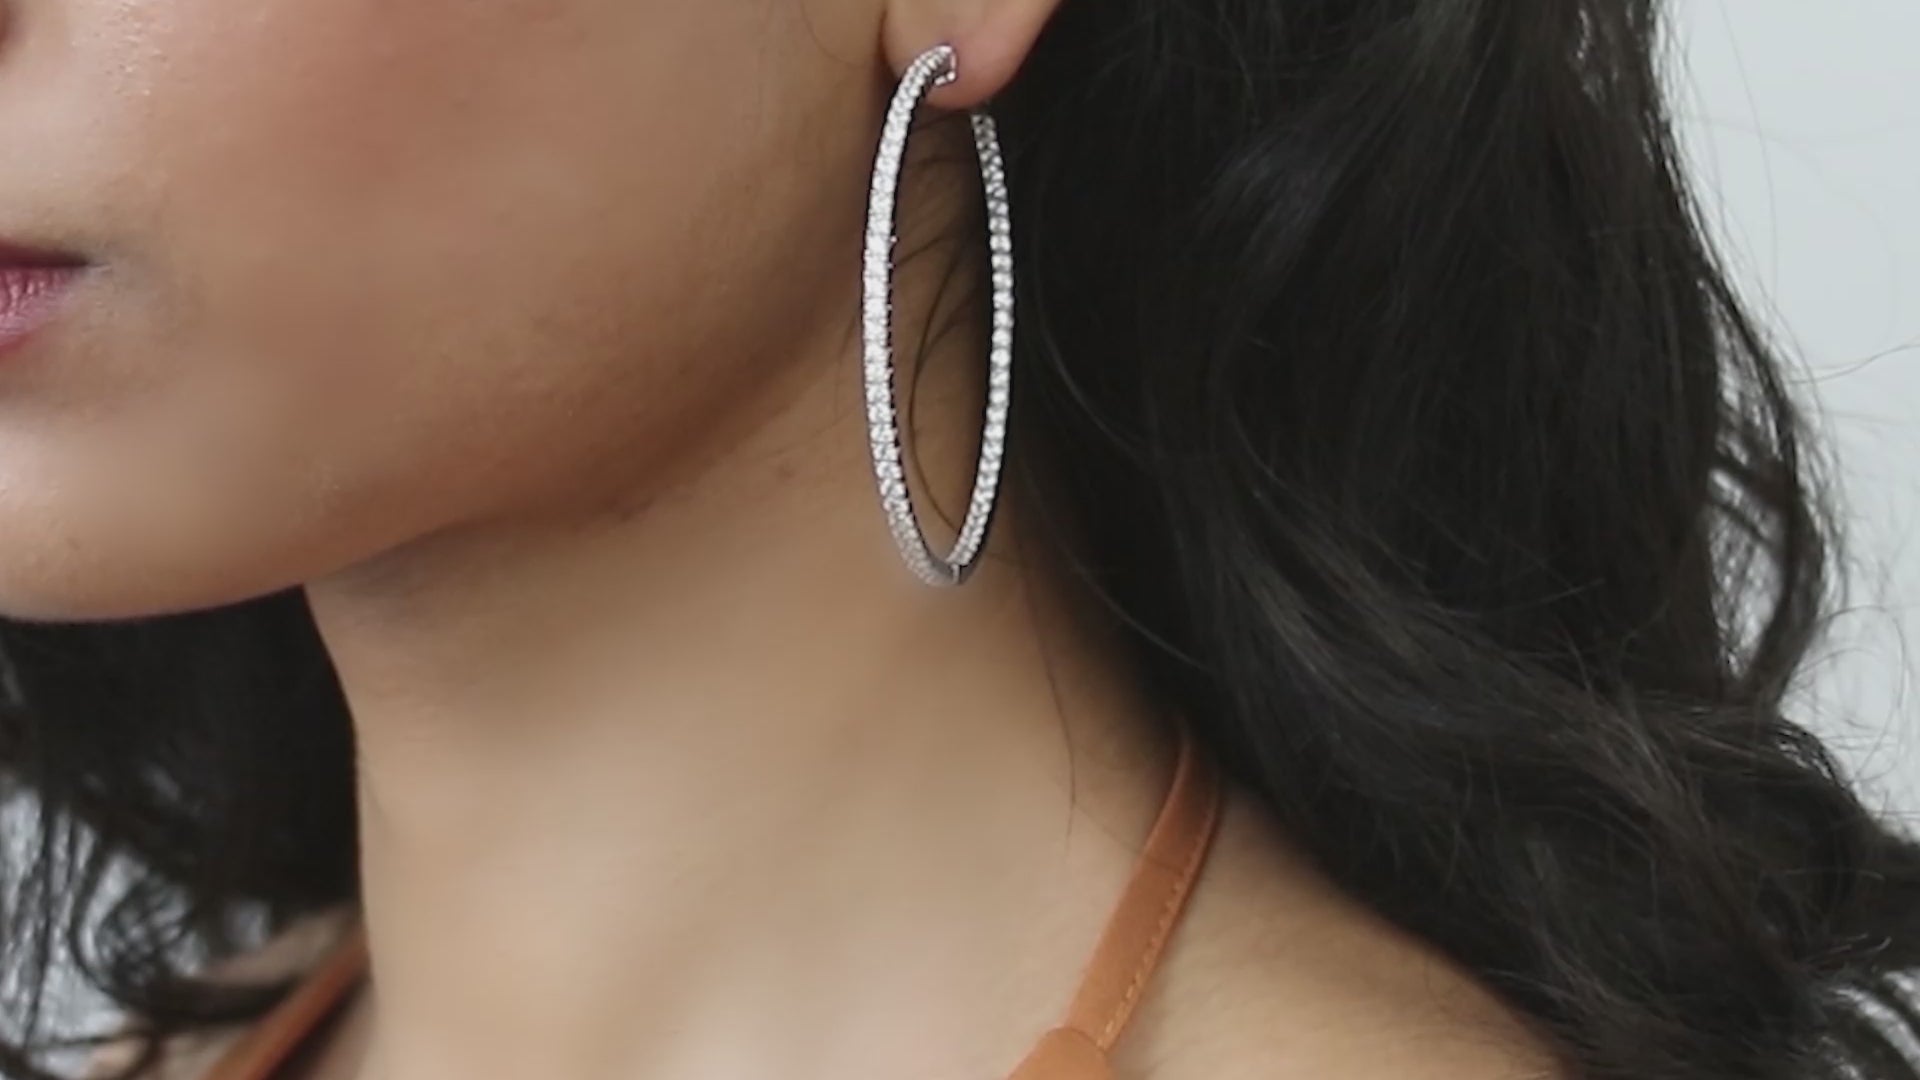 Video Contains CZ Large Inside-Out Hoop Earrings in Sterling Silver 2.2". Style Number E1000